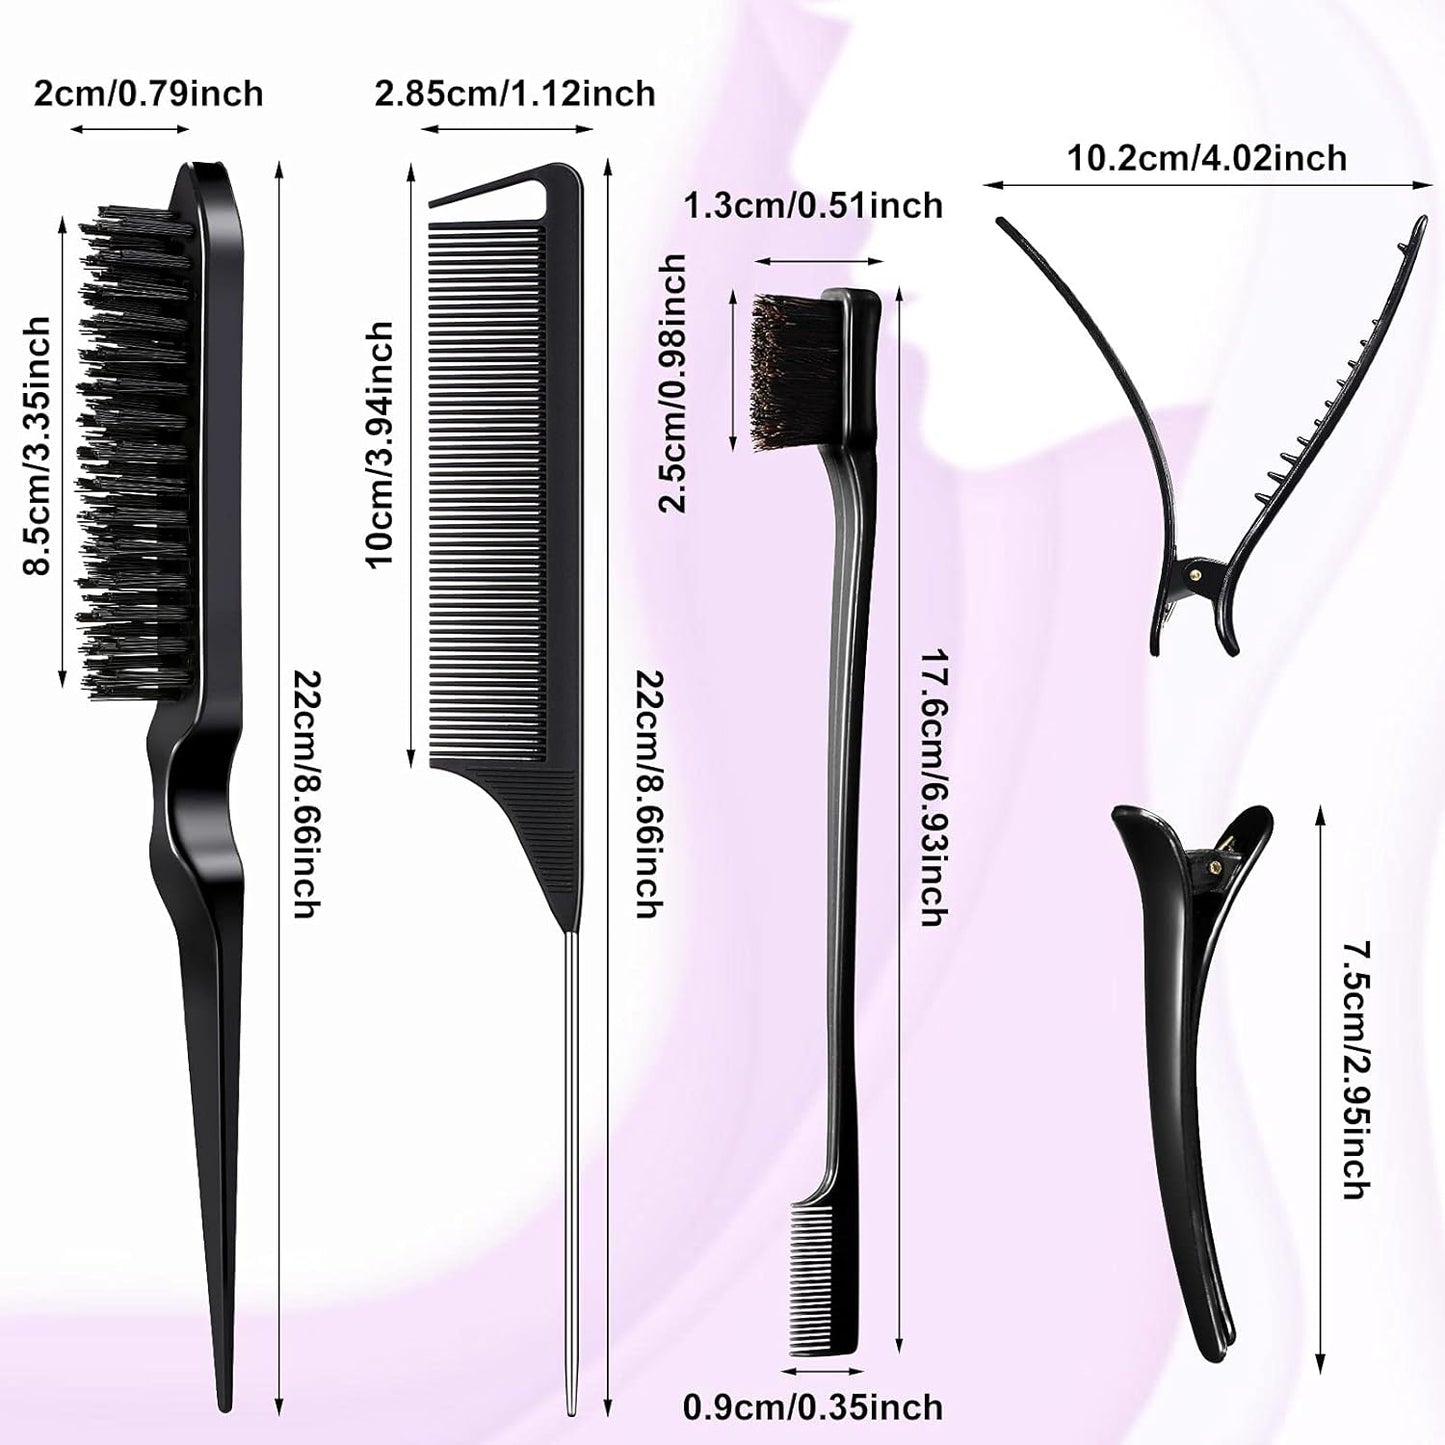 12 Pieces Hair Brush Set, Nylon Teasing Hair Brushes 3 Row Salon Teasing Brush, Double Sided Hair Edge Brush Smooth Comb Grooming, Rat Tail Combs with Duckbill Clips for Women Girls (Purple, Black)